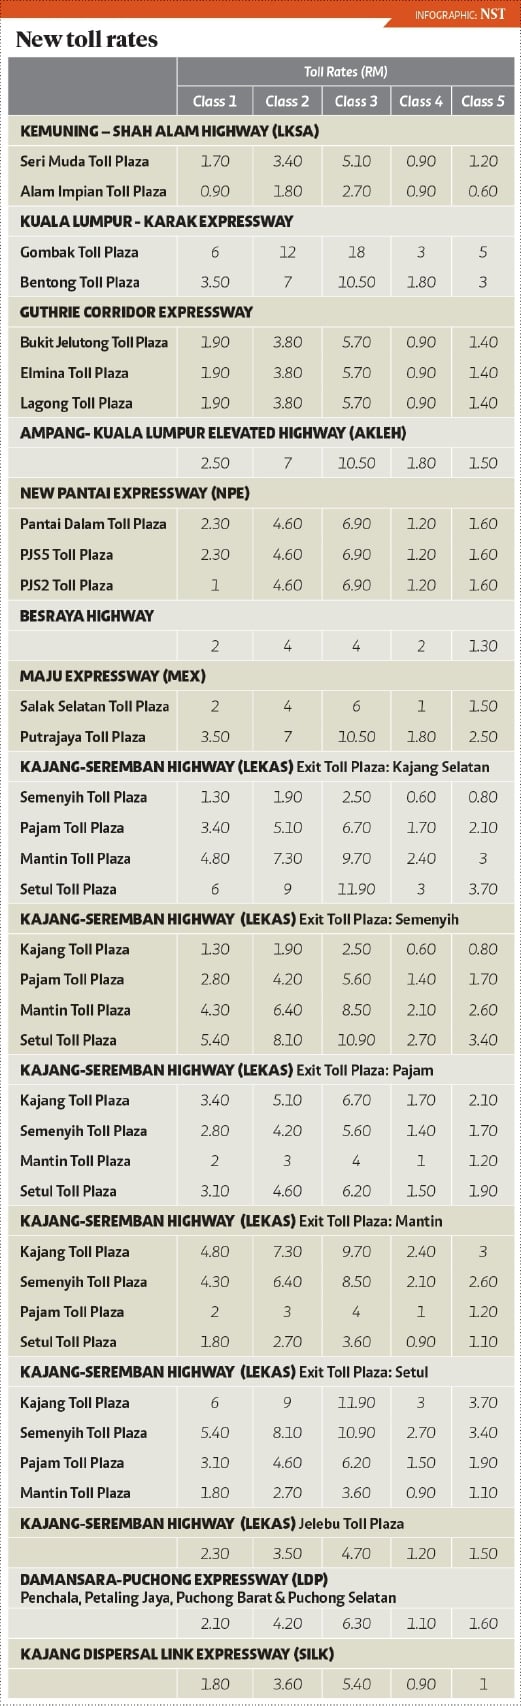 Plus toll rate